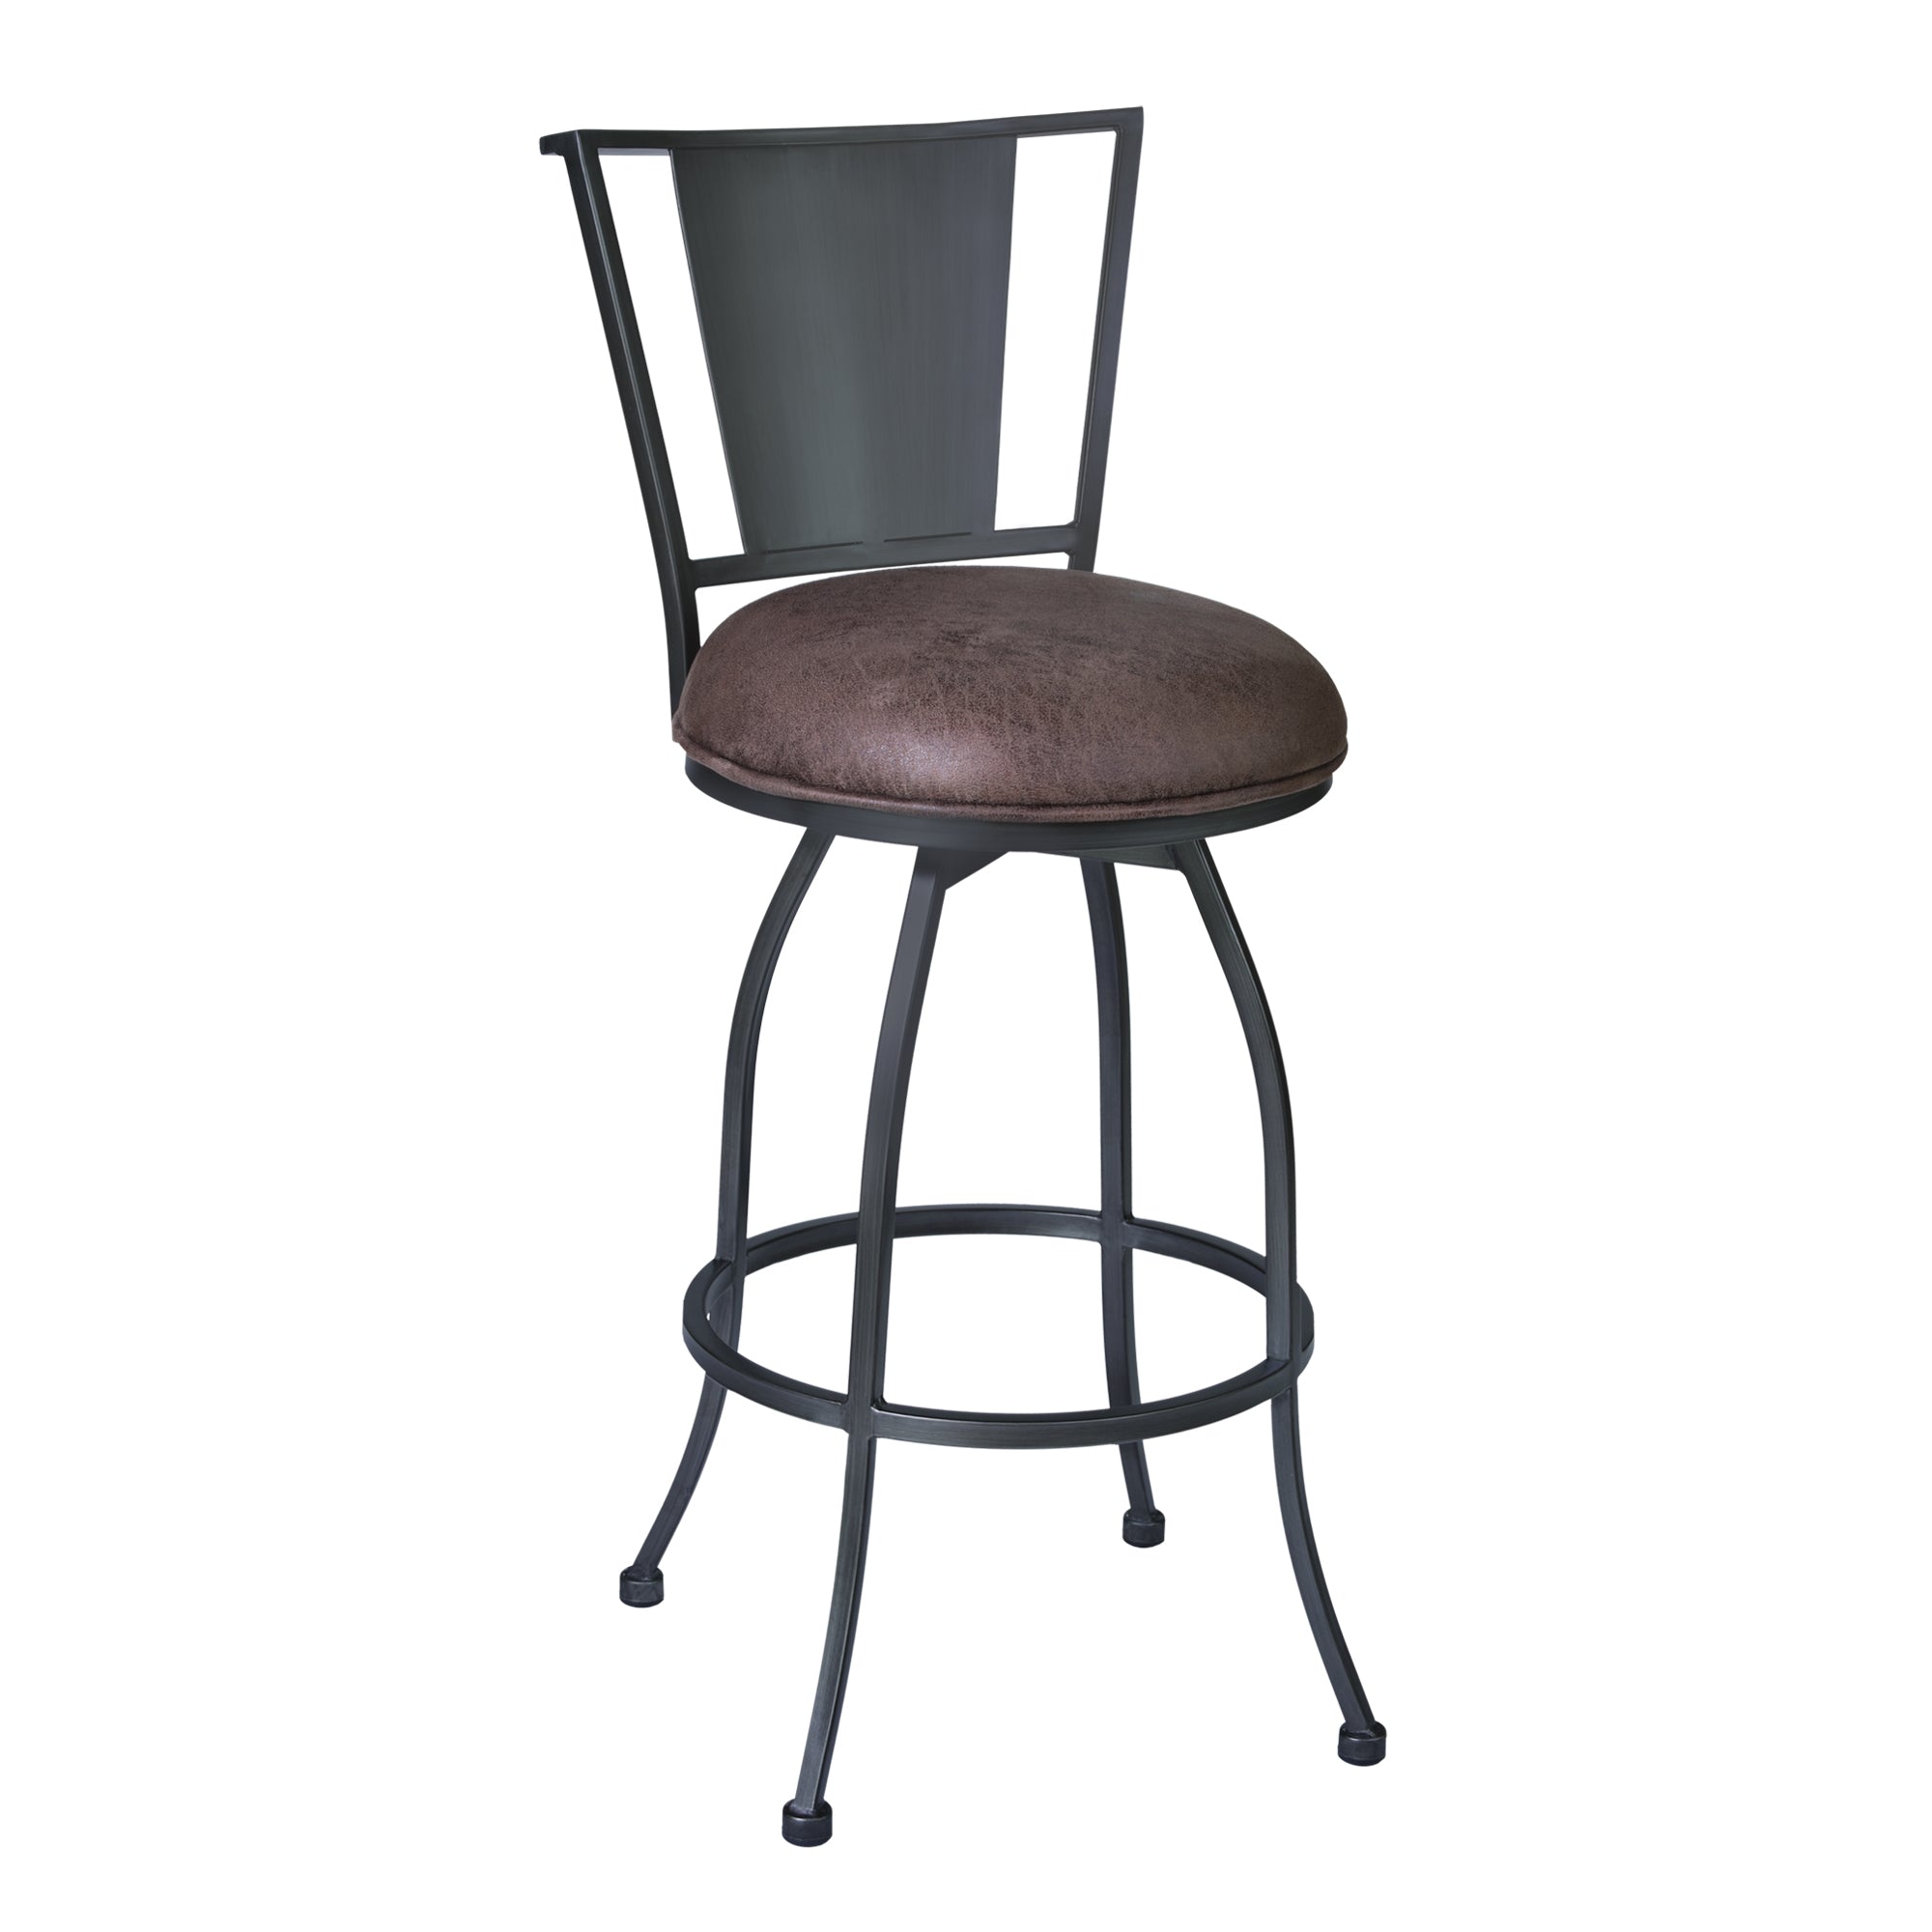 Armen Living LCDY30BATO Dynasty 30 Bar Height Barstool in Mineral finish with Bandero Tobacco